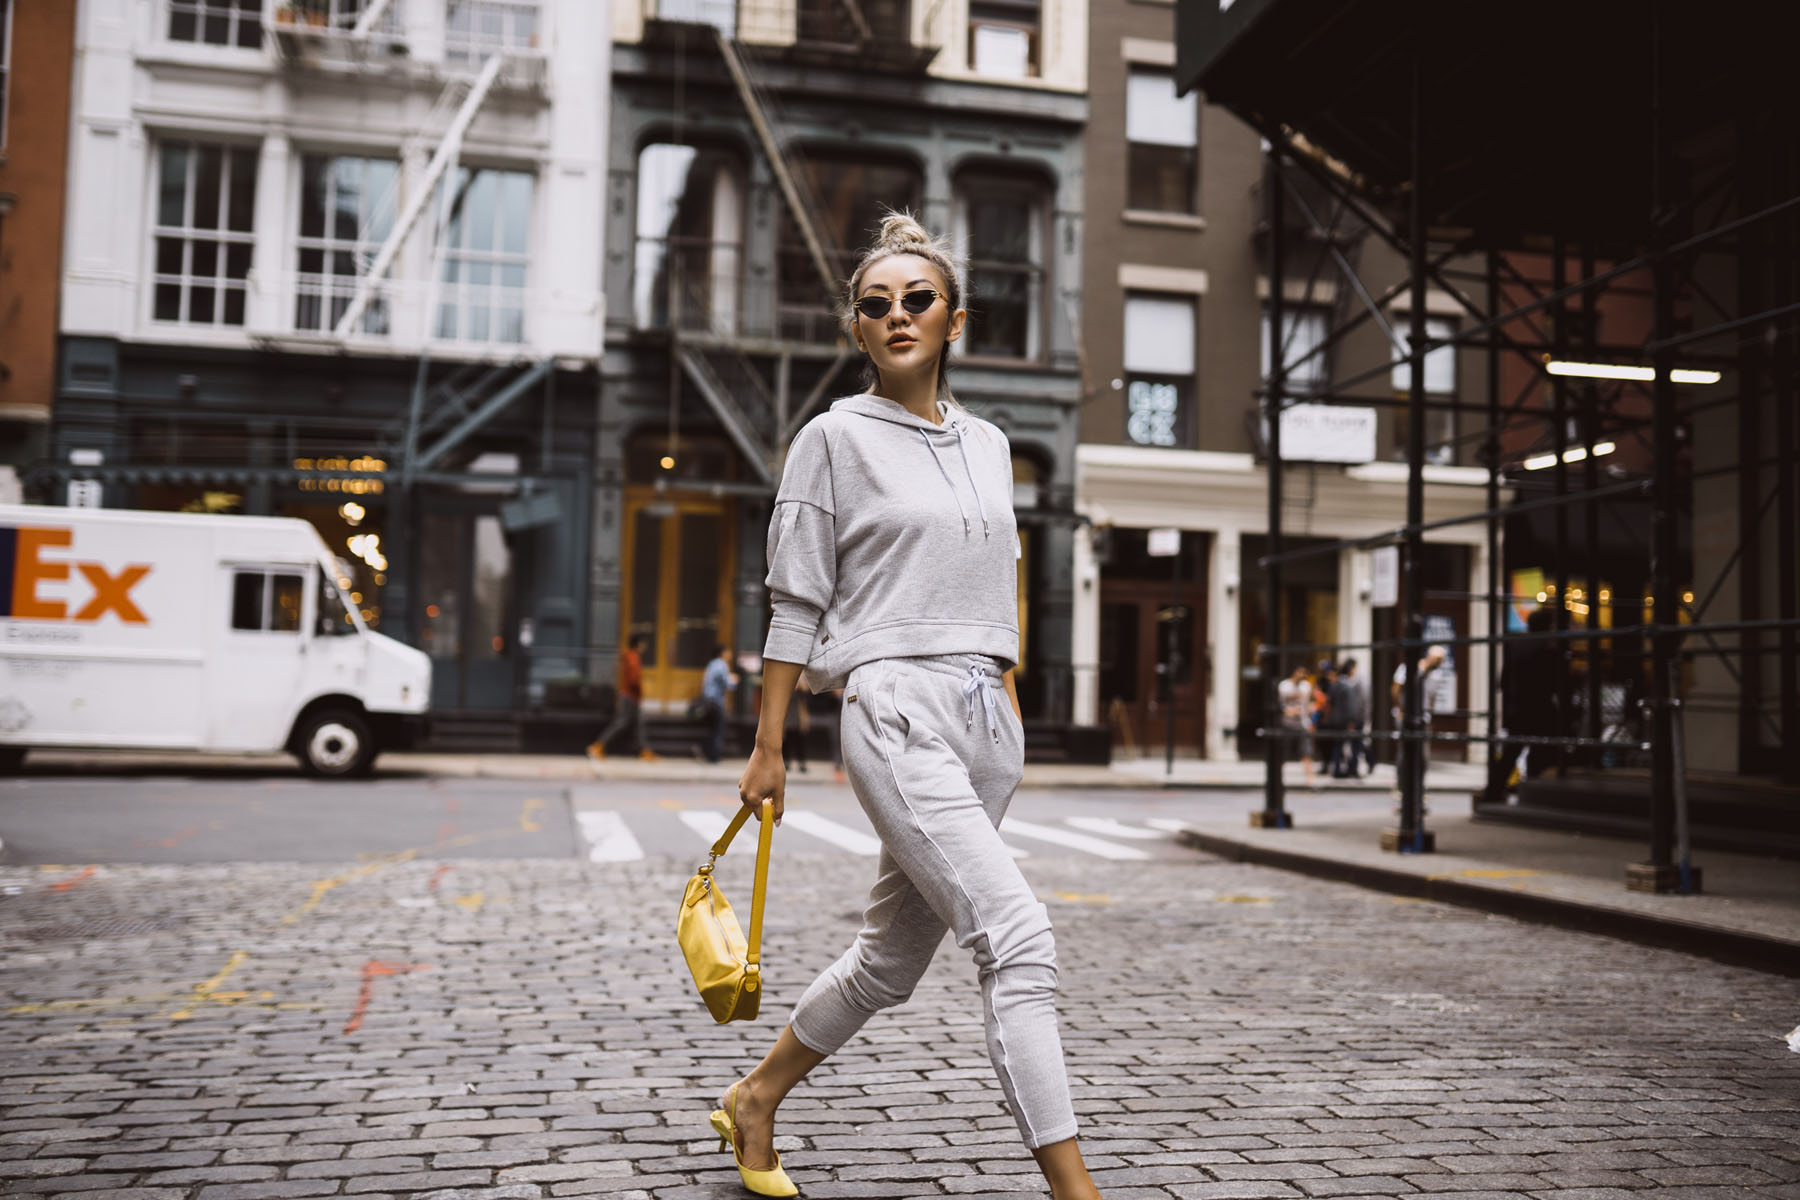 fresh ways to wear athleisure, joggers and kitten heels, joggers with heels, cool athleisure style // Notjessfashion.com